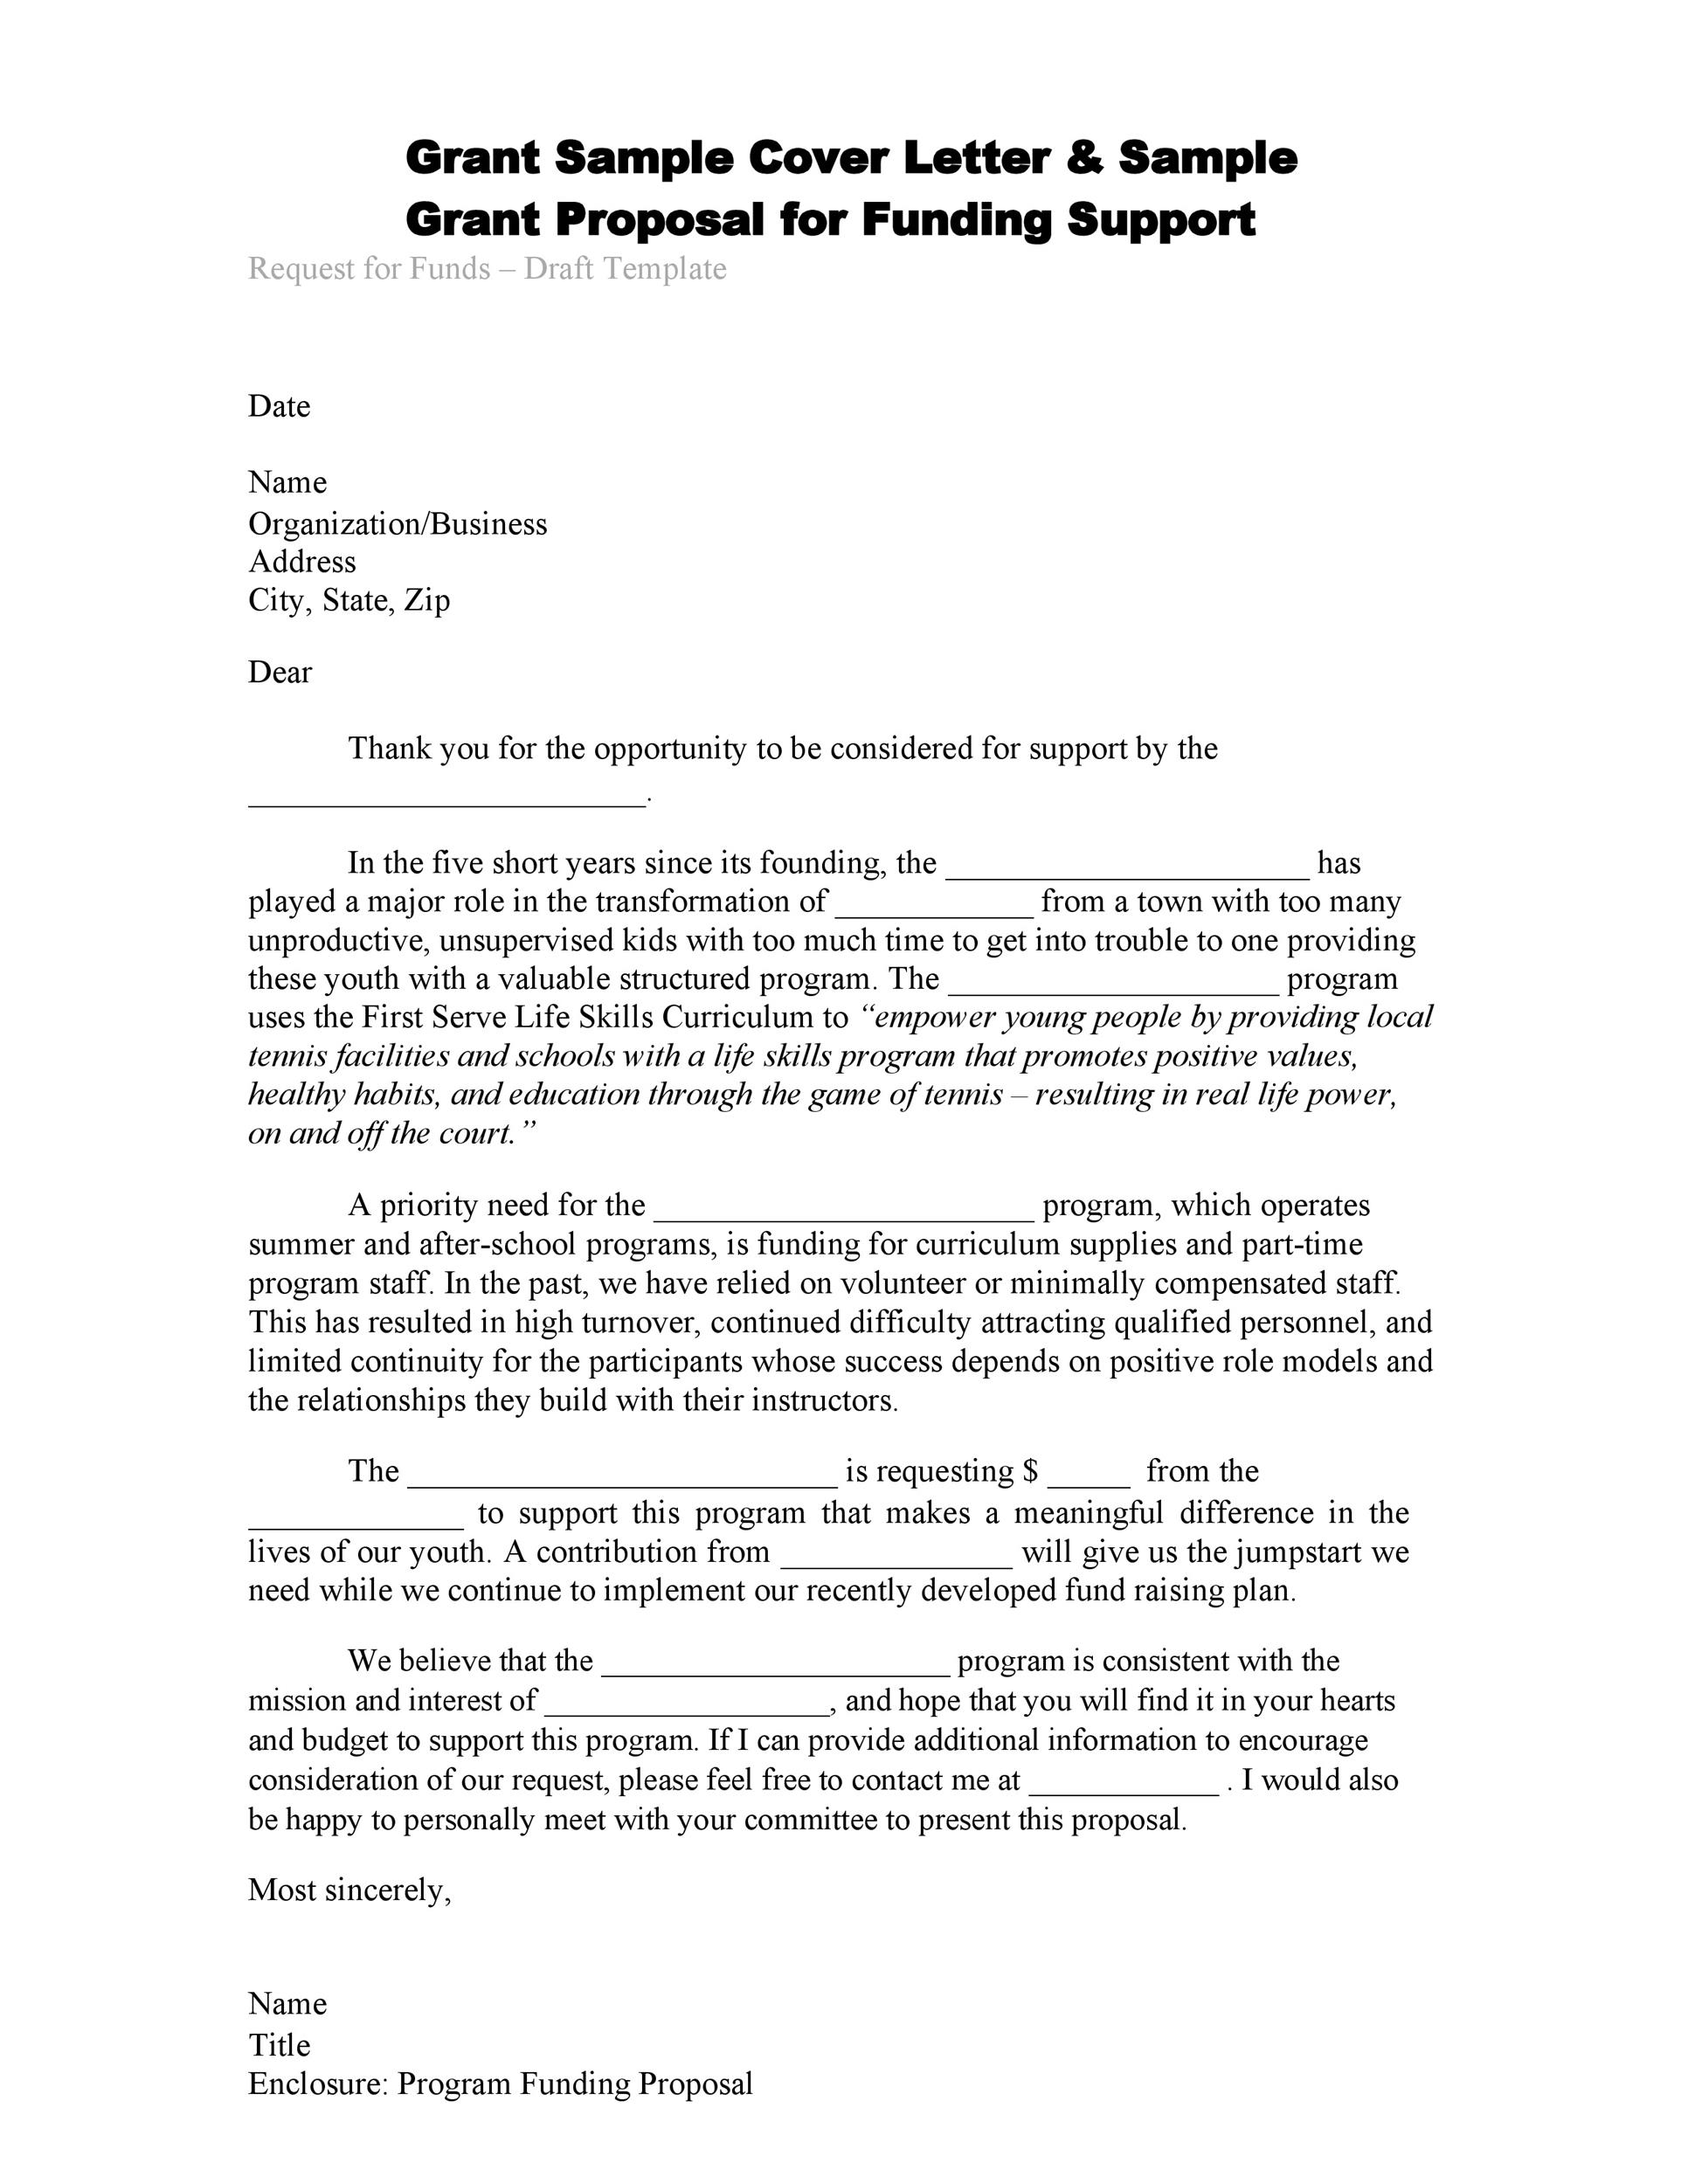 free-grant-proposal-cover-letter-template-how-to-write-a-proposal-cover-letter